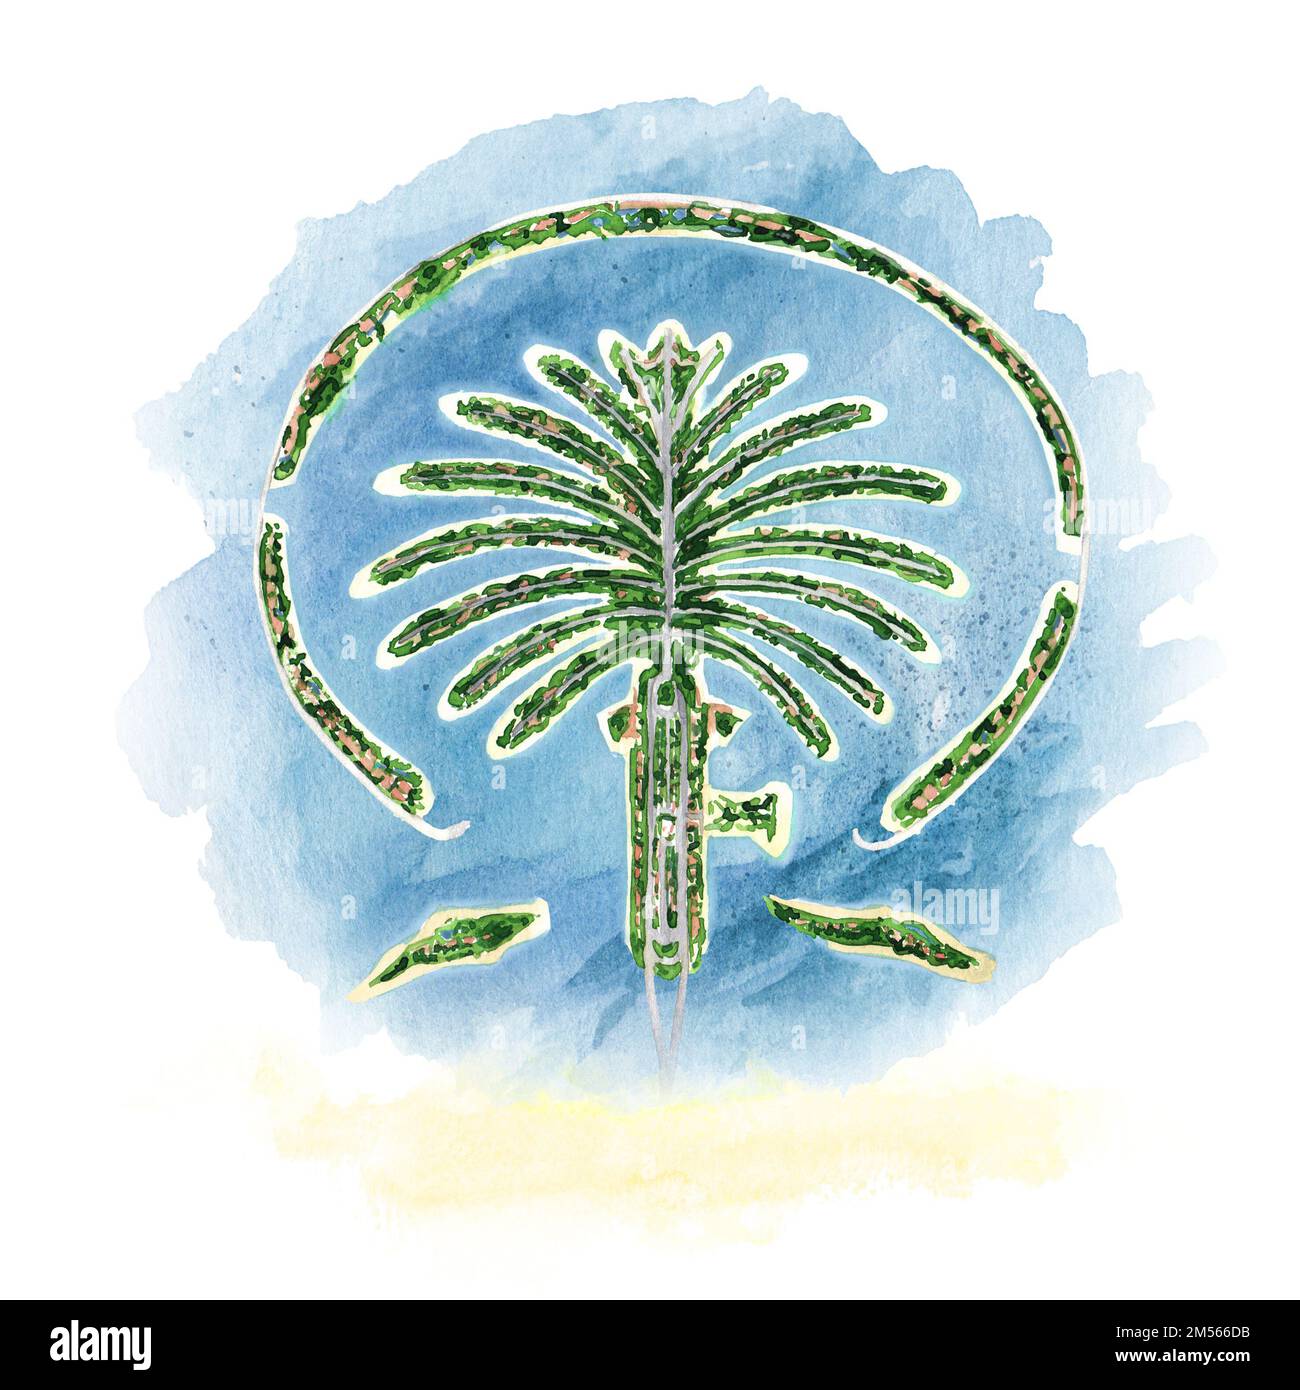 Palm Jumeirah, artificial island, Dubai, United Arab Emirates. Top view. Hand drawn watercolor illustration isolated on white background Stock Photo